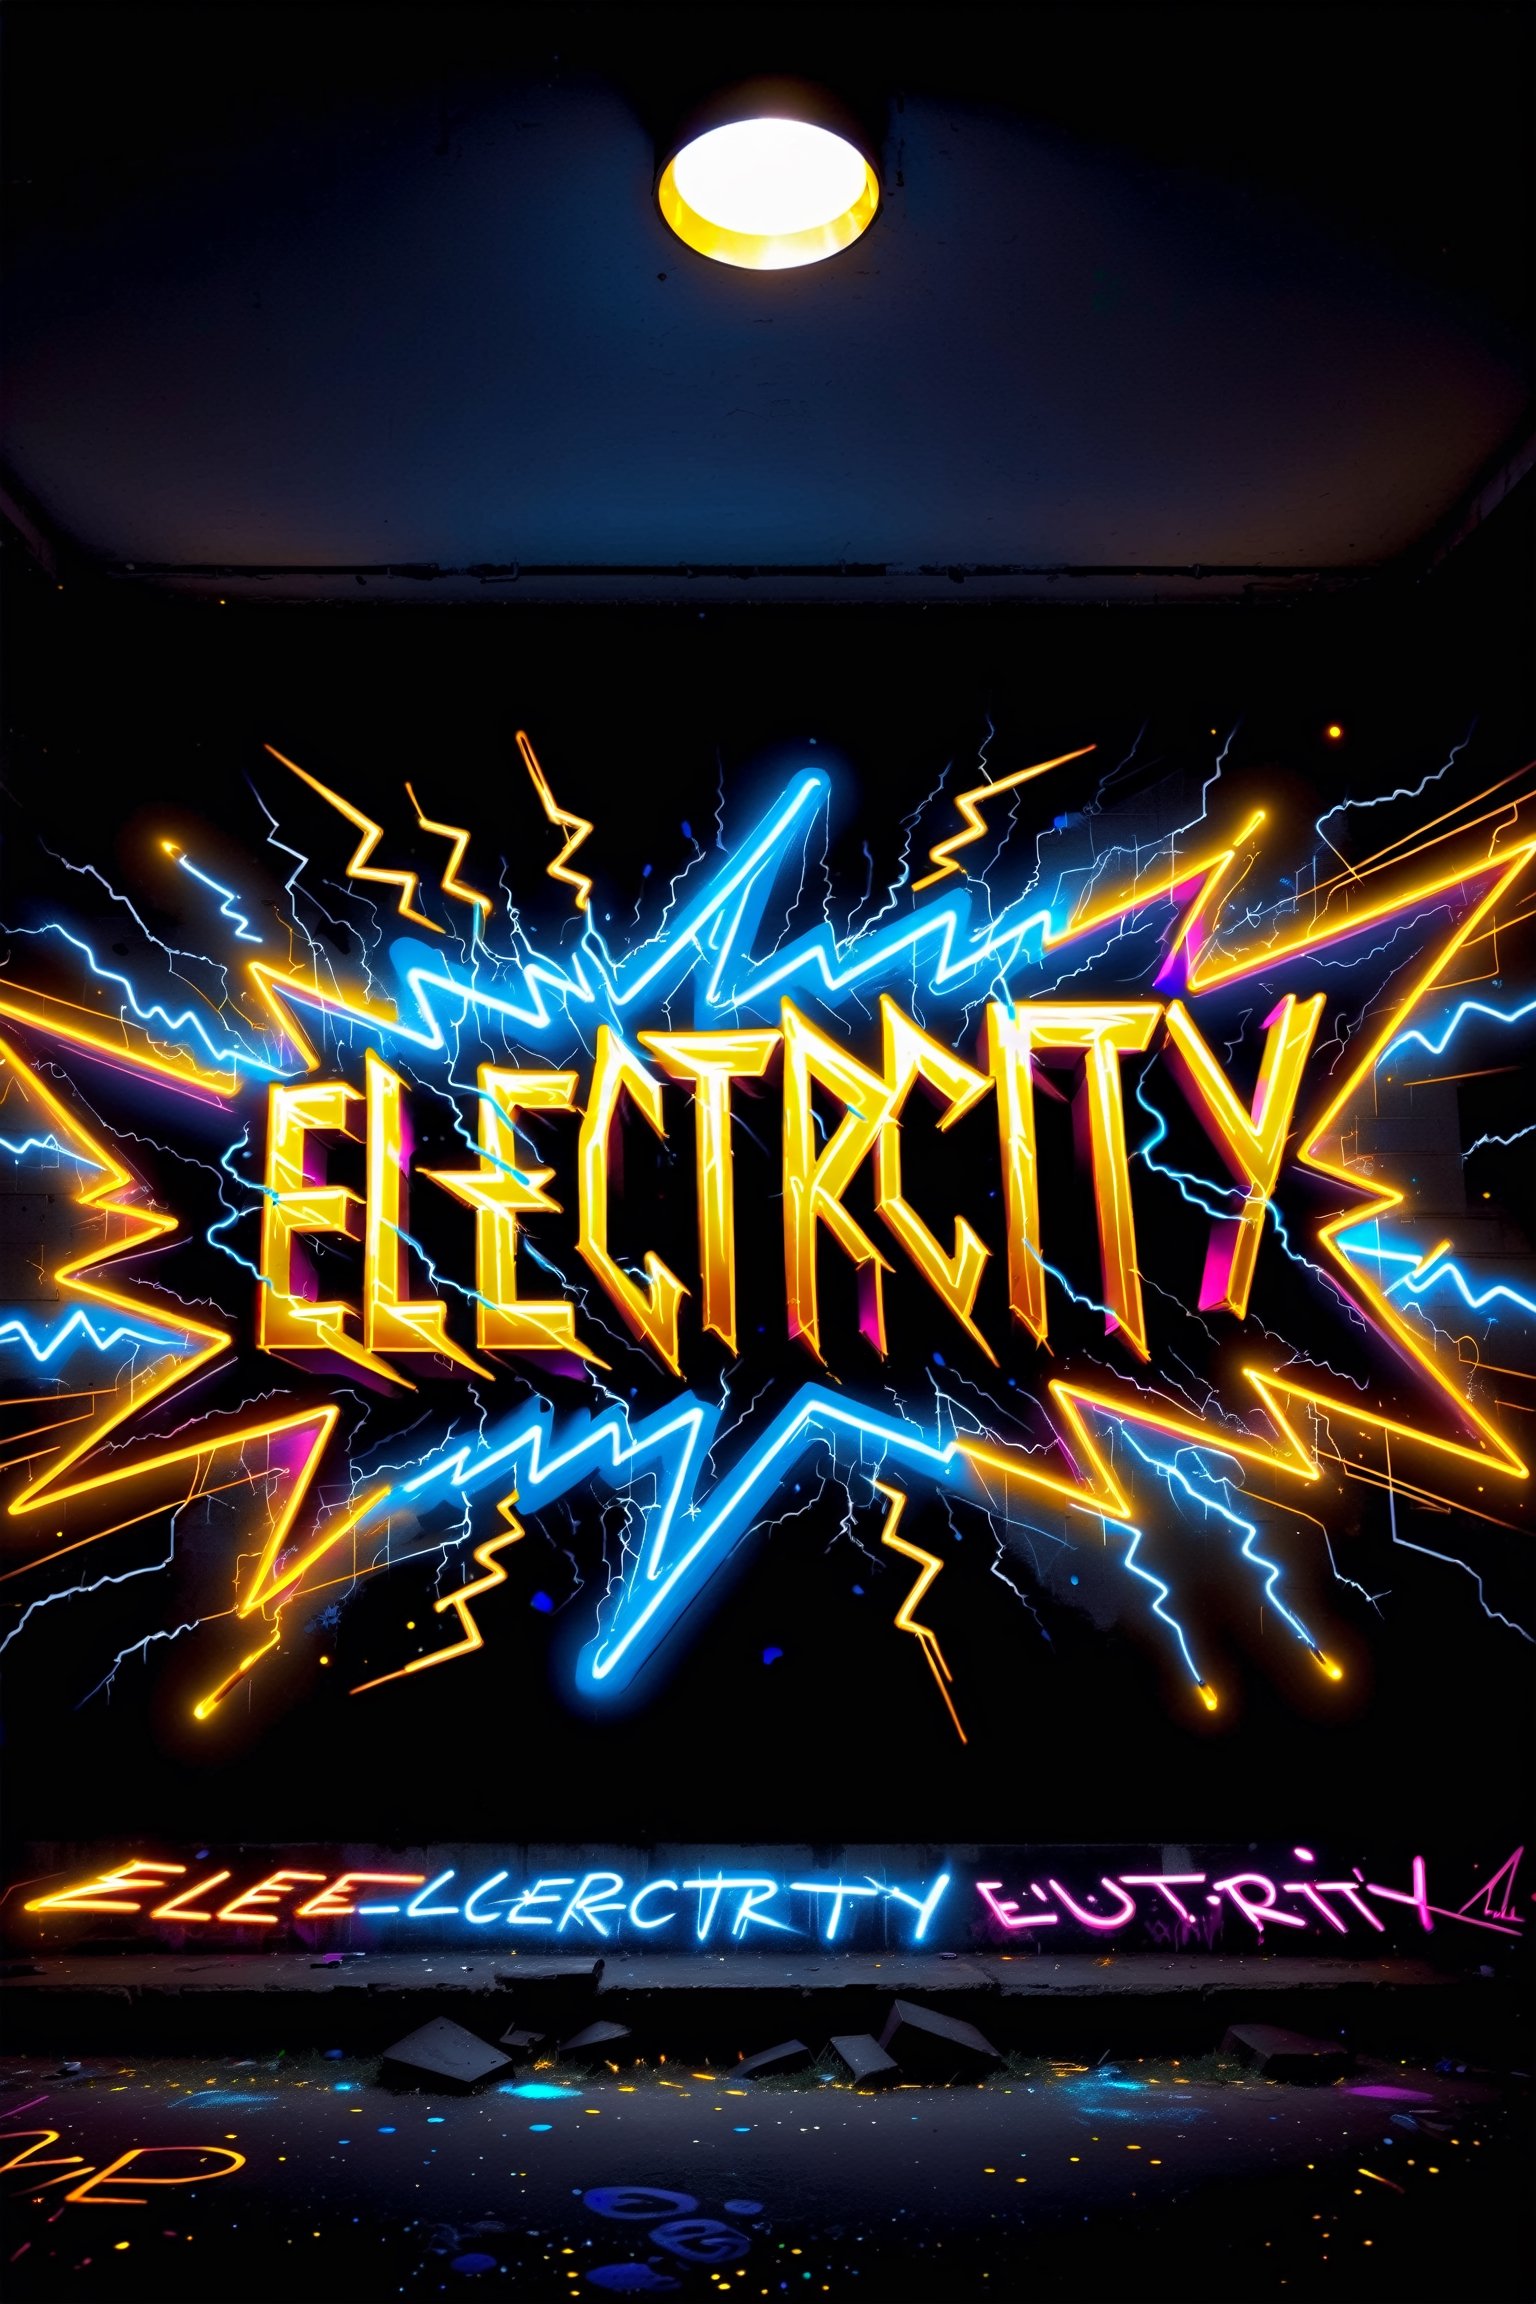 text saying "electricity",  graffiti neon street art electricity industries,  elements lightning gold light  neon vivid colors, SelectiveColorStyle,DonM3l3m3nt4lXL